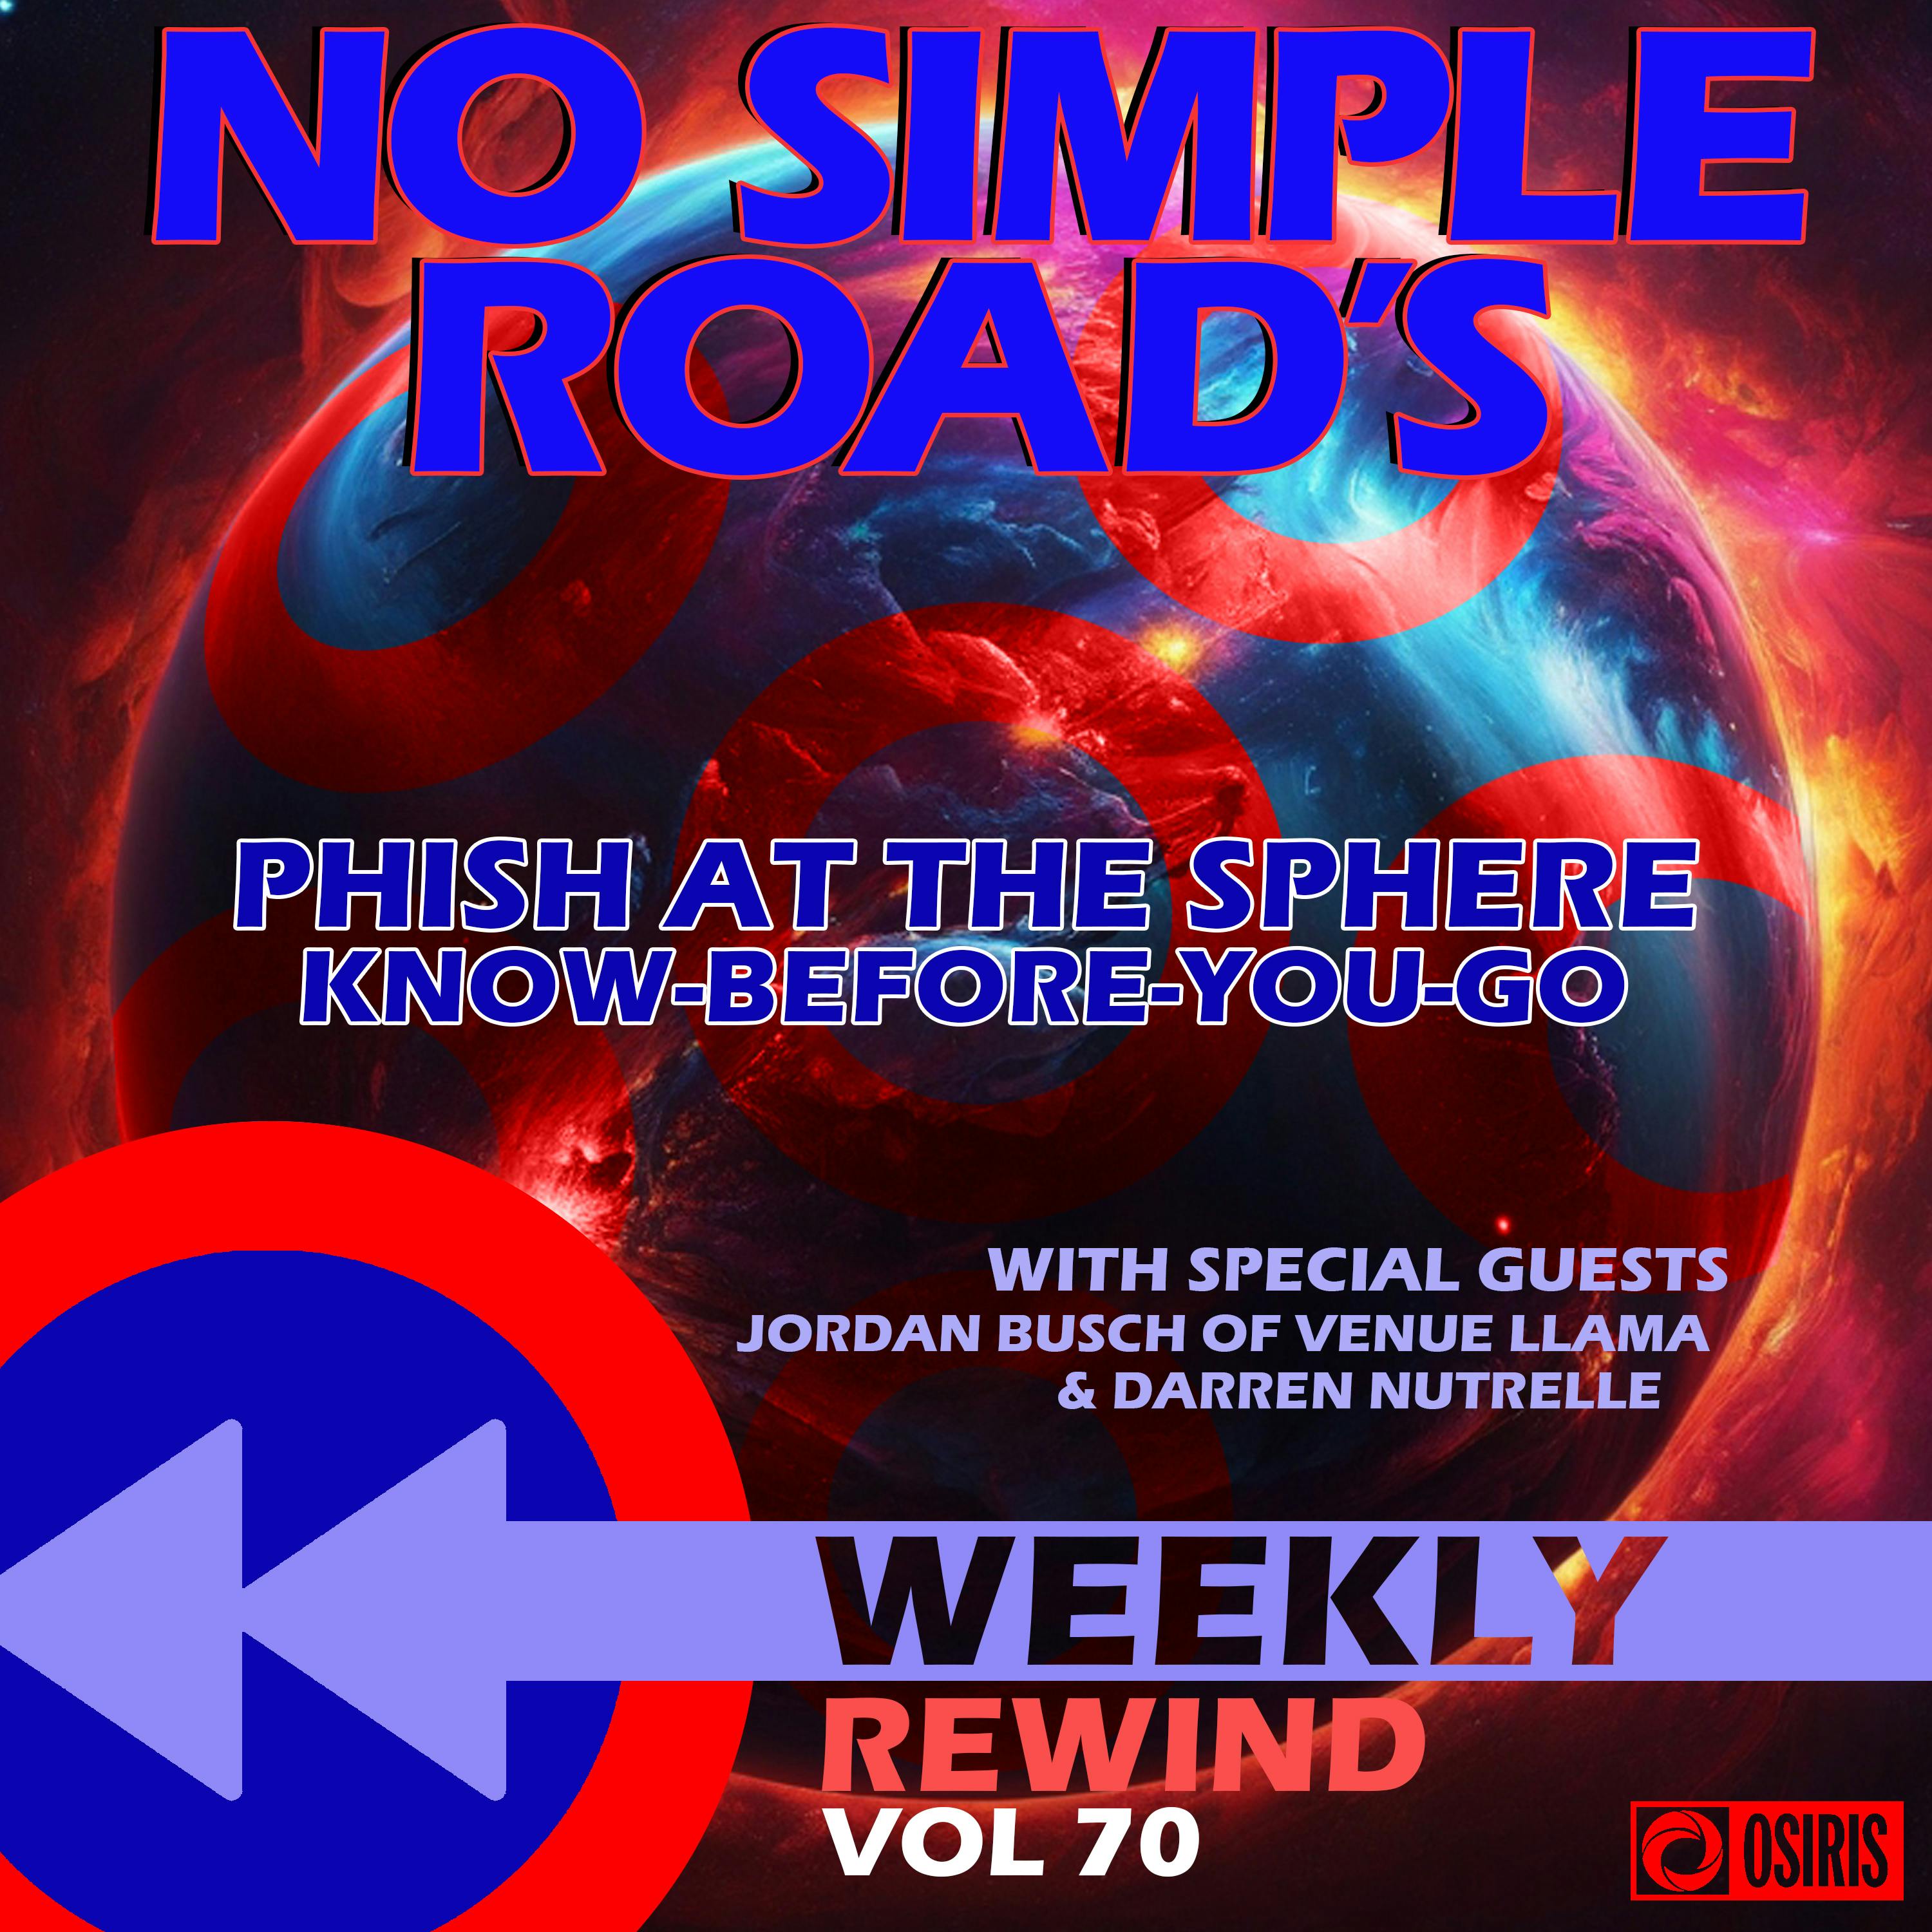 No Simple Road's Weekly Rewind Vol. 70 - Phish At The Sphere Know Before You Go